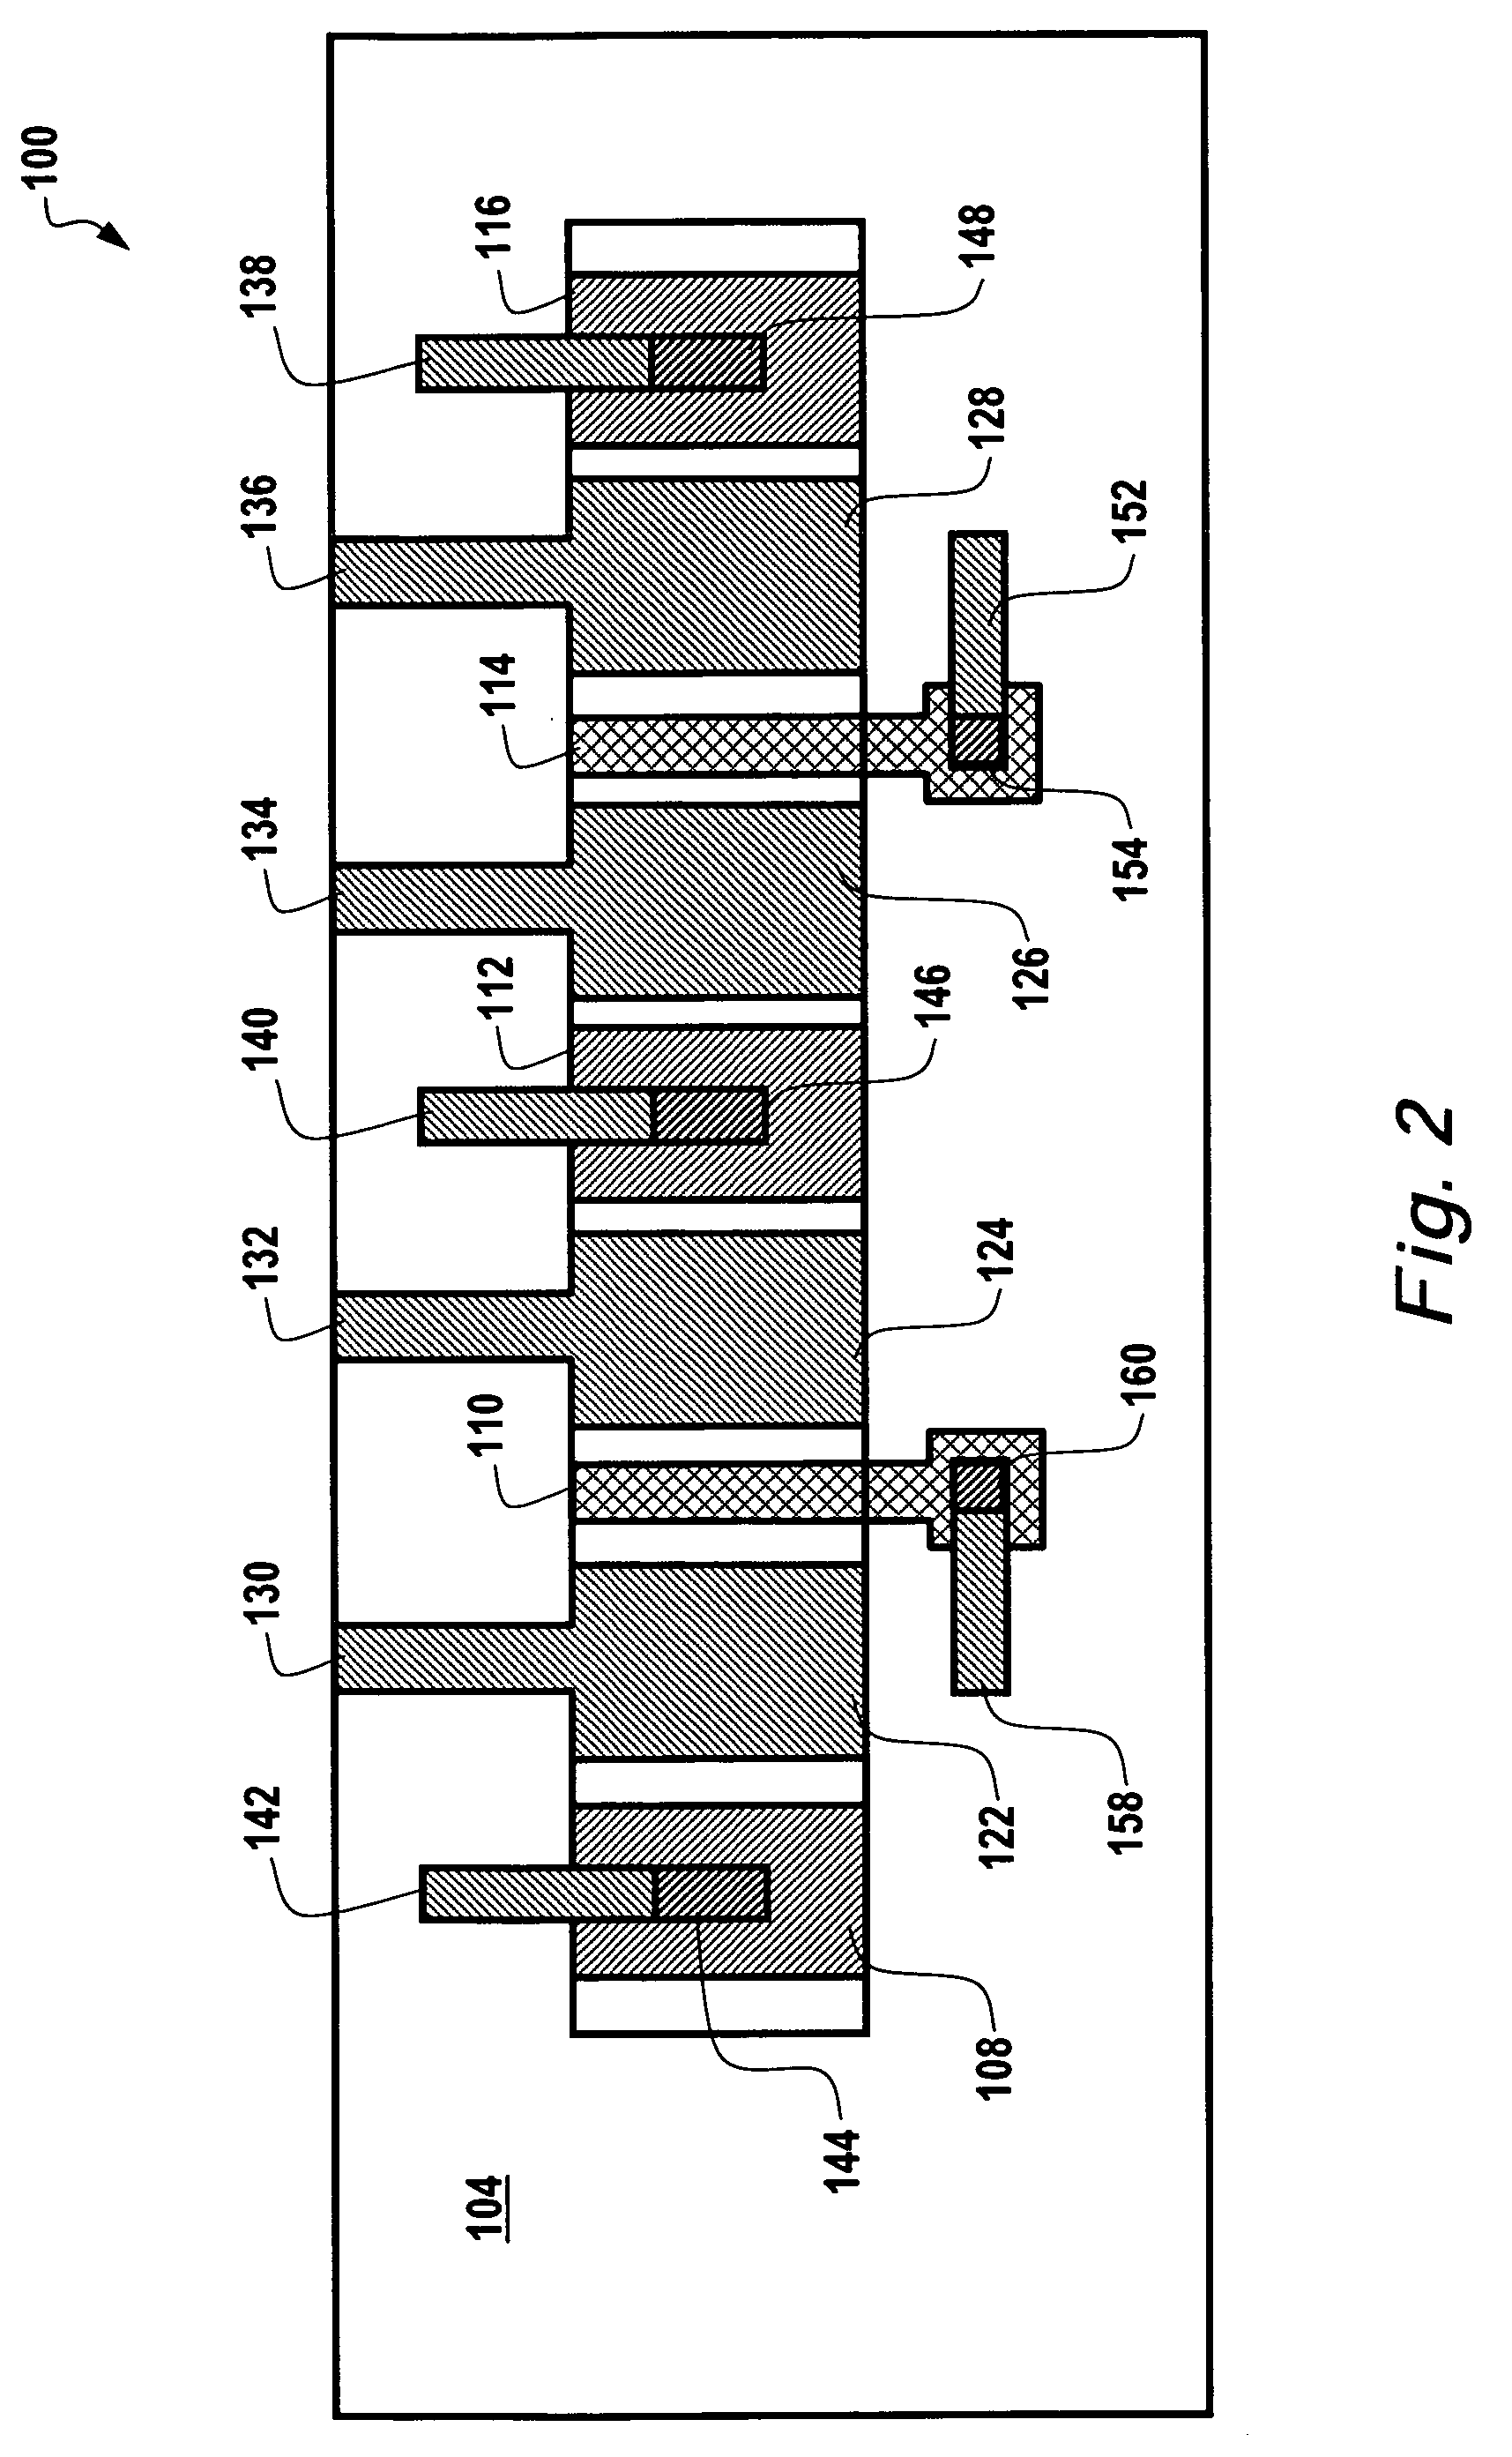 Vertical hall effect device